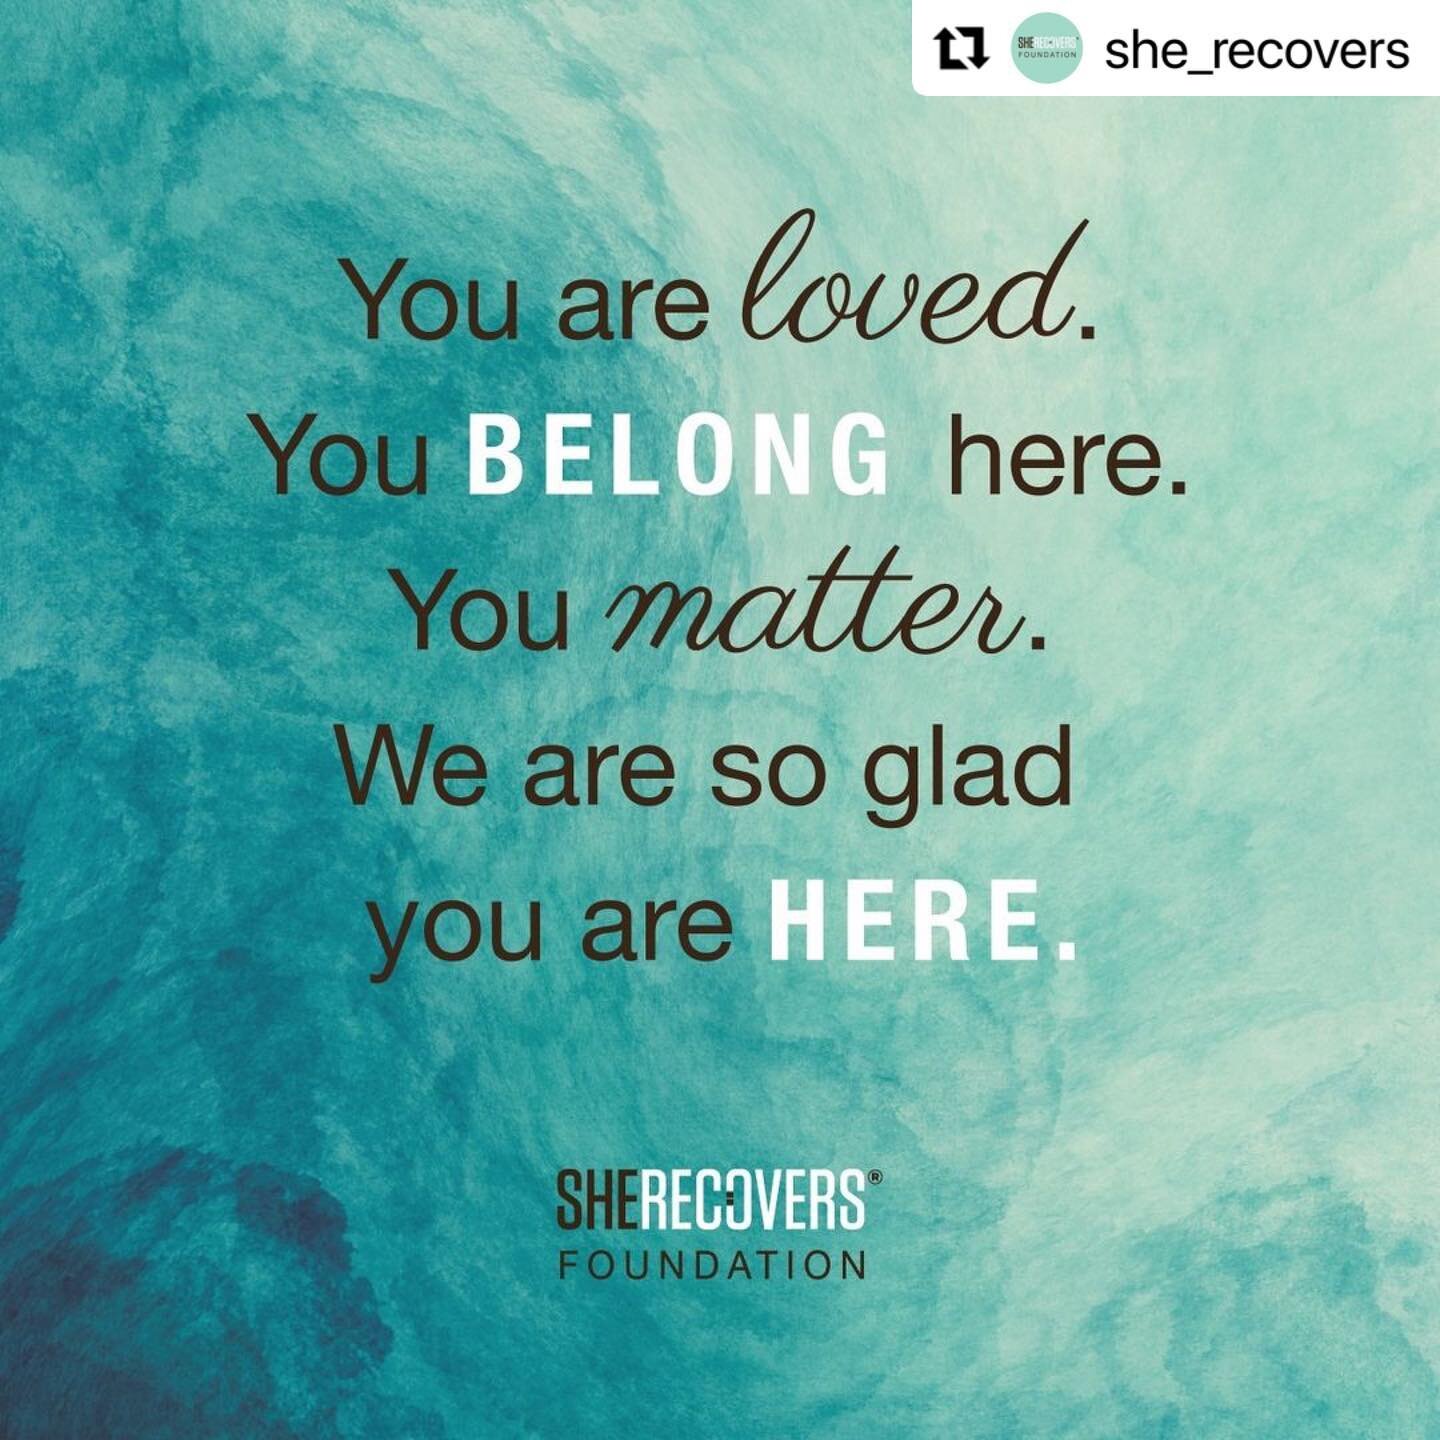 So excited for this new meeting 👇 link in my bio to join 👆

#Repost @she_recovers with @use.repost
・・・
Are you new to the SHE RECOVERS Community or curious to learn more about the free SHE RECOVERS Together Online Gatherings?

Join SHE RECOVERS Tru